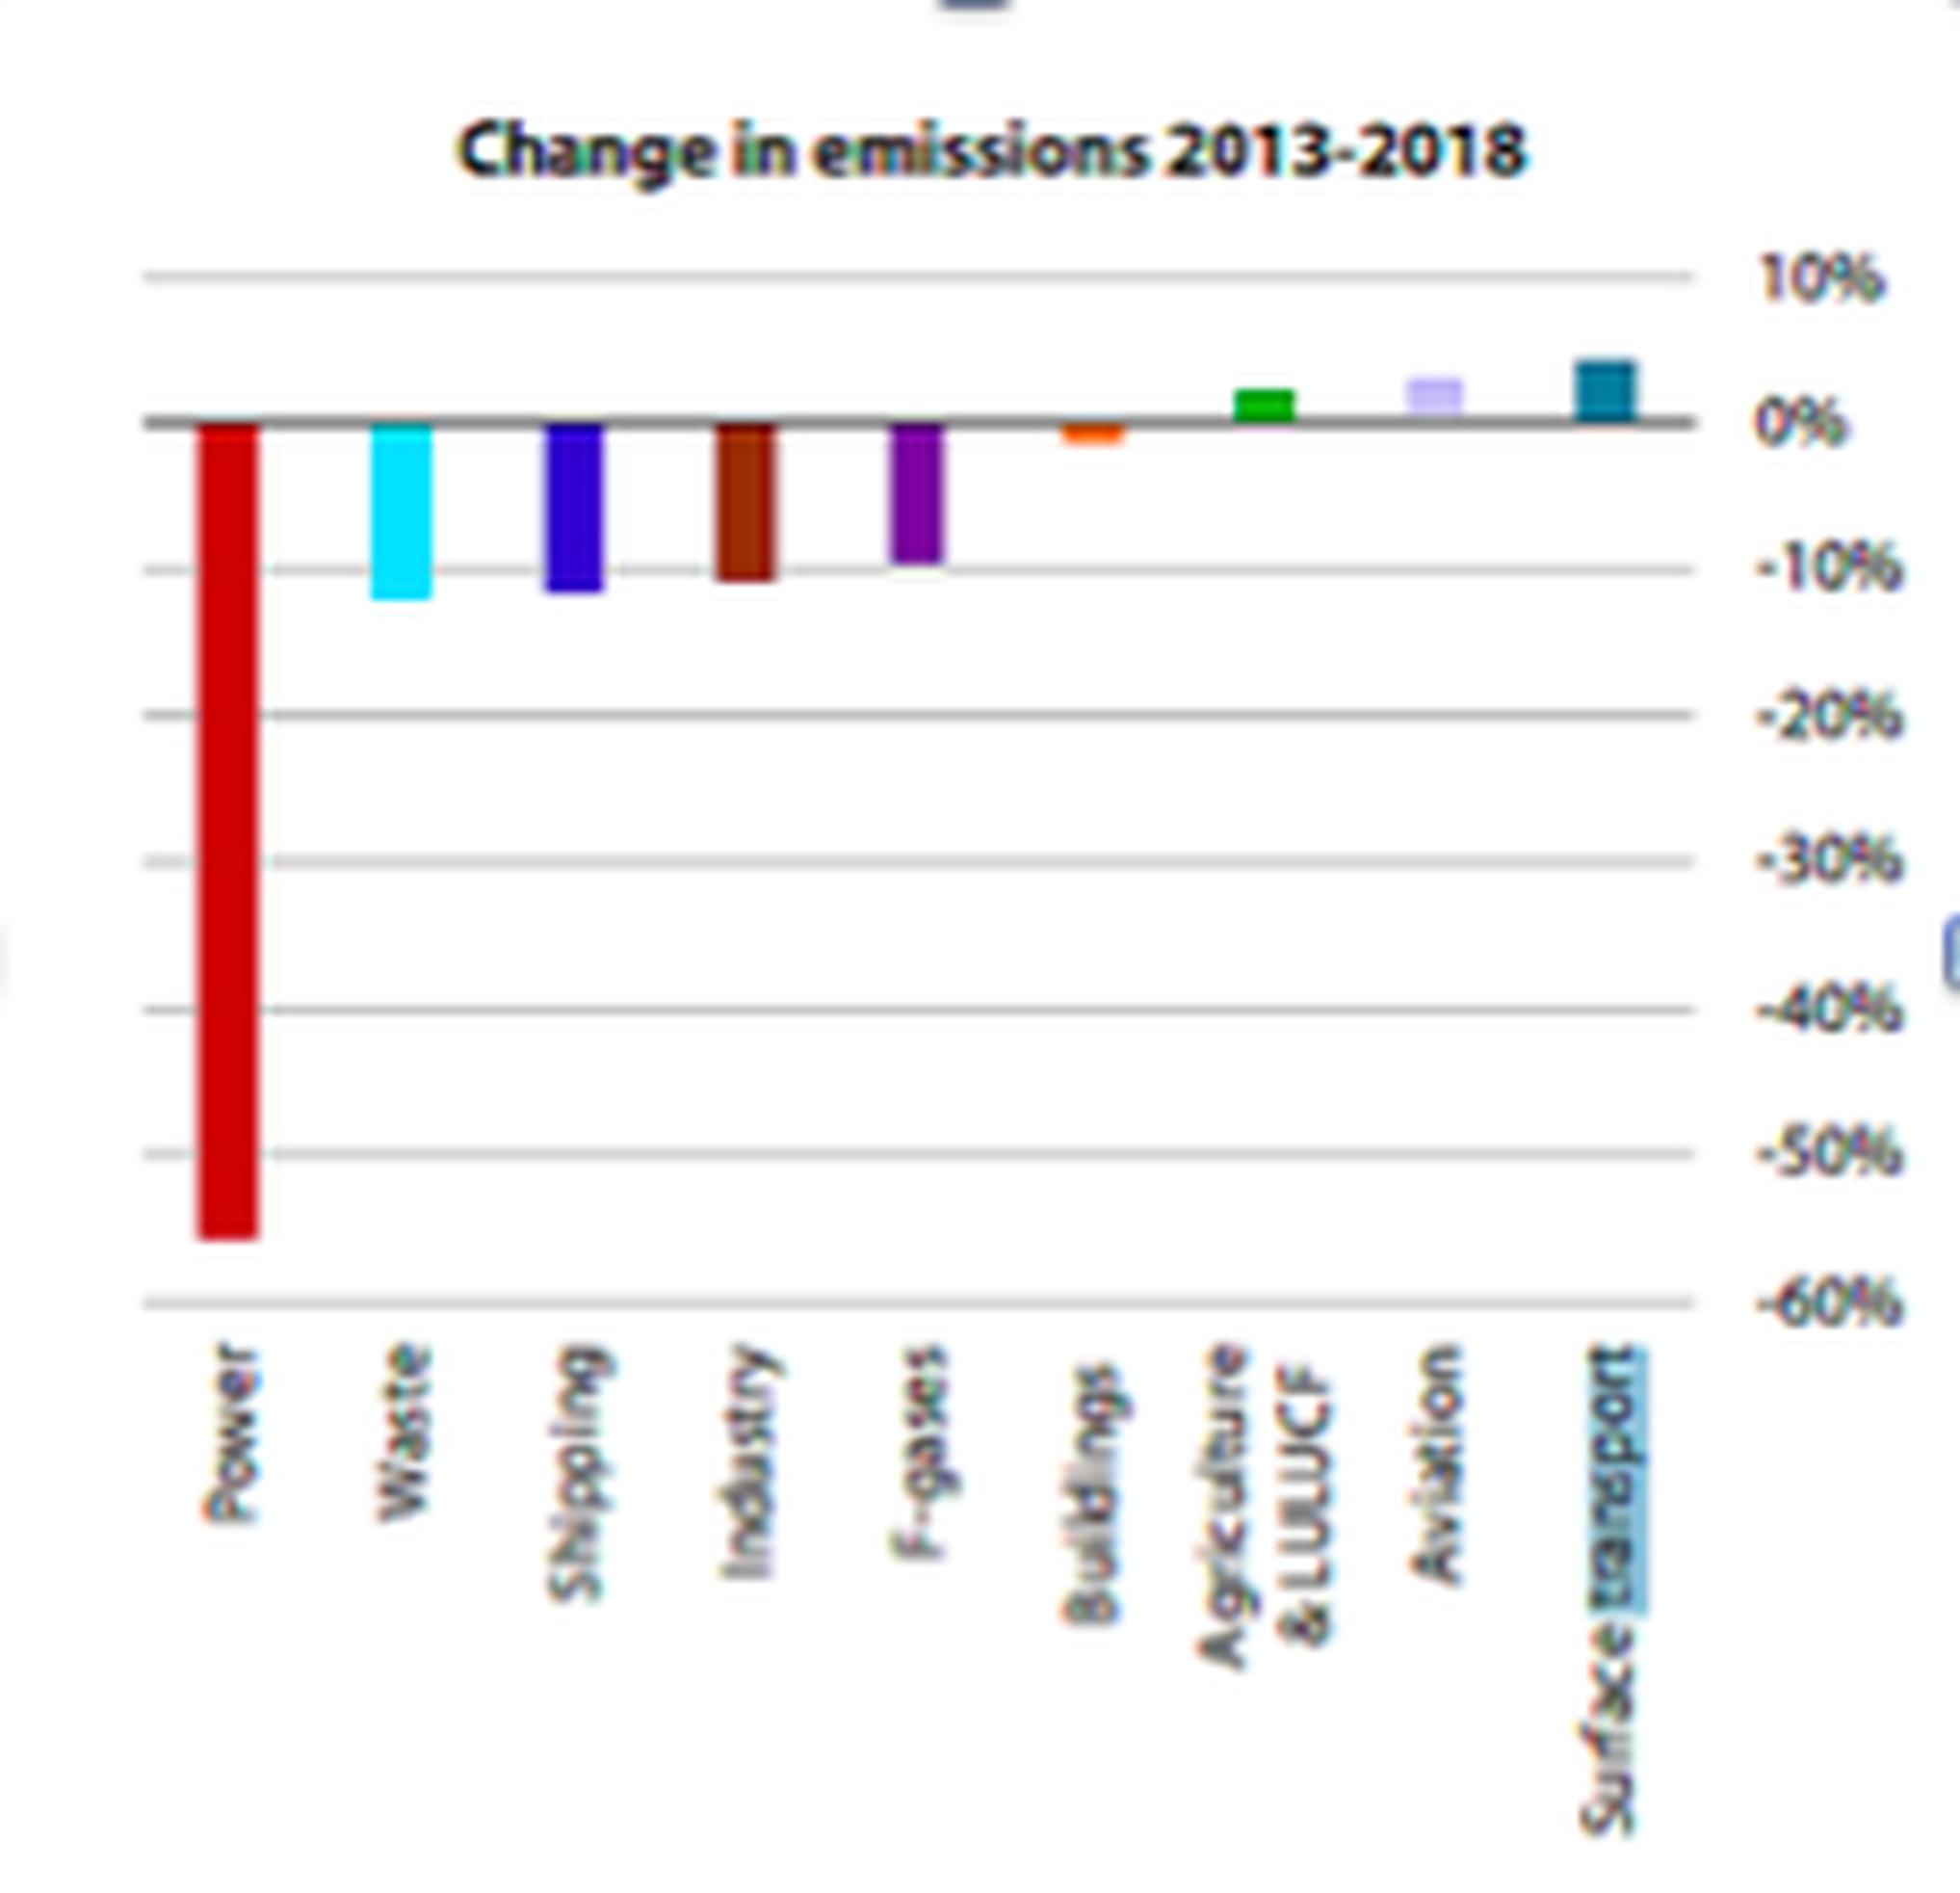 Figure 1: Changes in sectoral emissions between 2013 and 2018; building emissions in this chart are temperature-adjusted. Source: BEIS (2019) 2017 UK Greenhouse Gas Emissions, Final Figures; CCC Calculations.